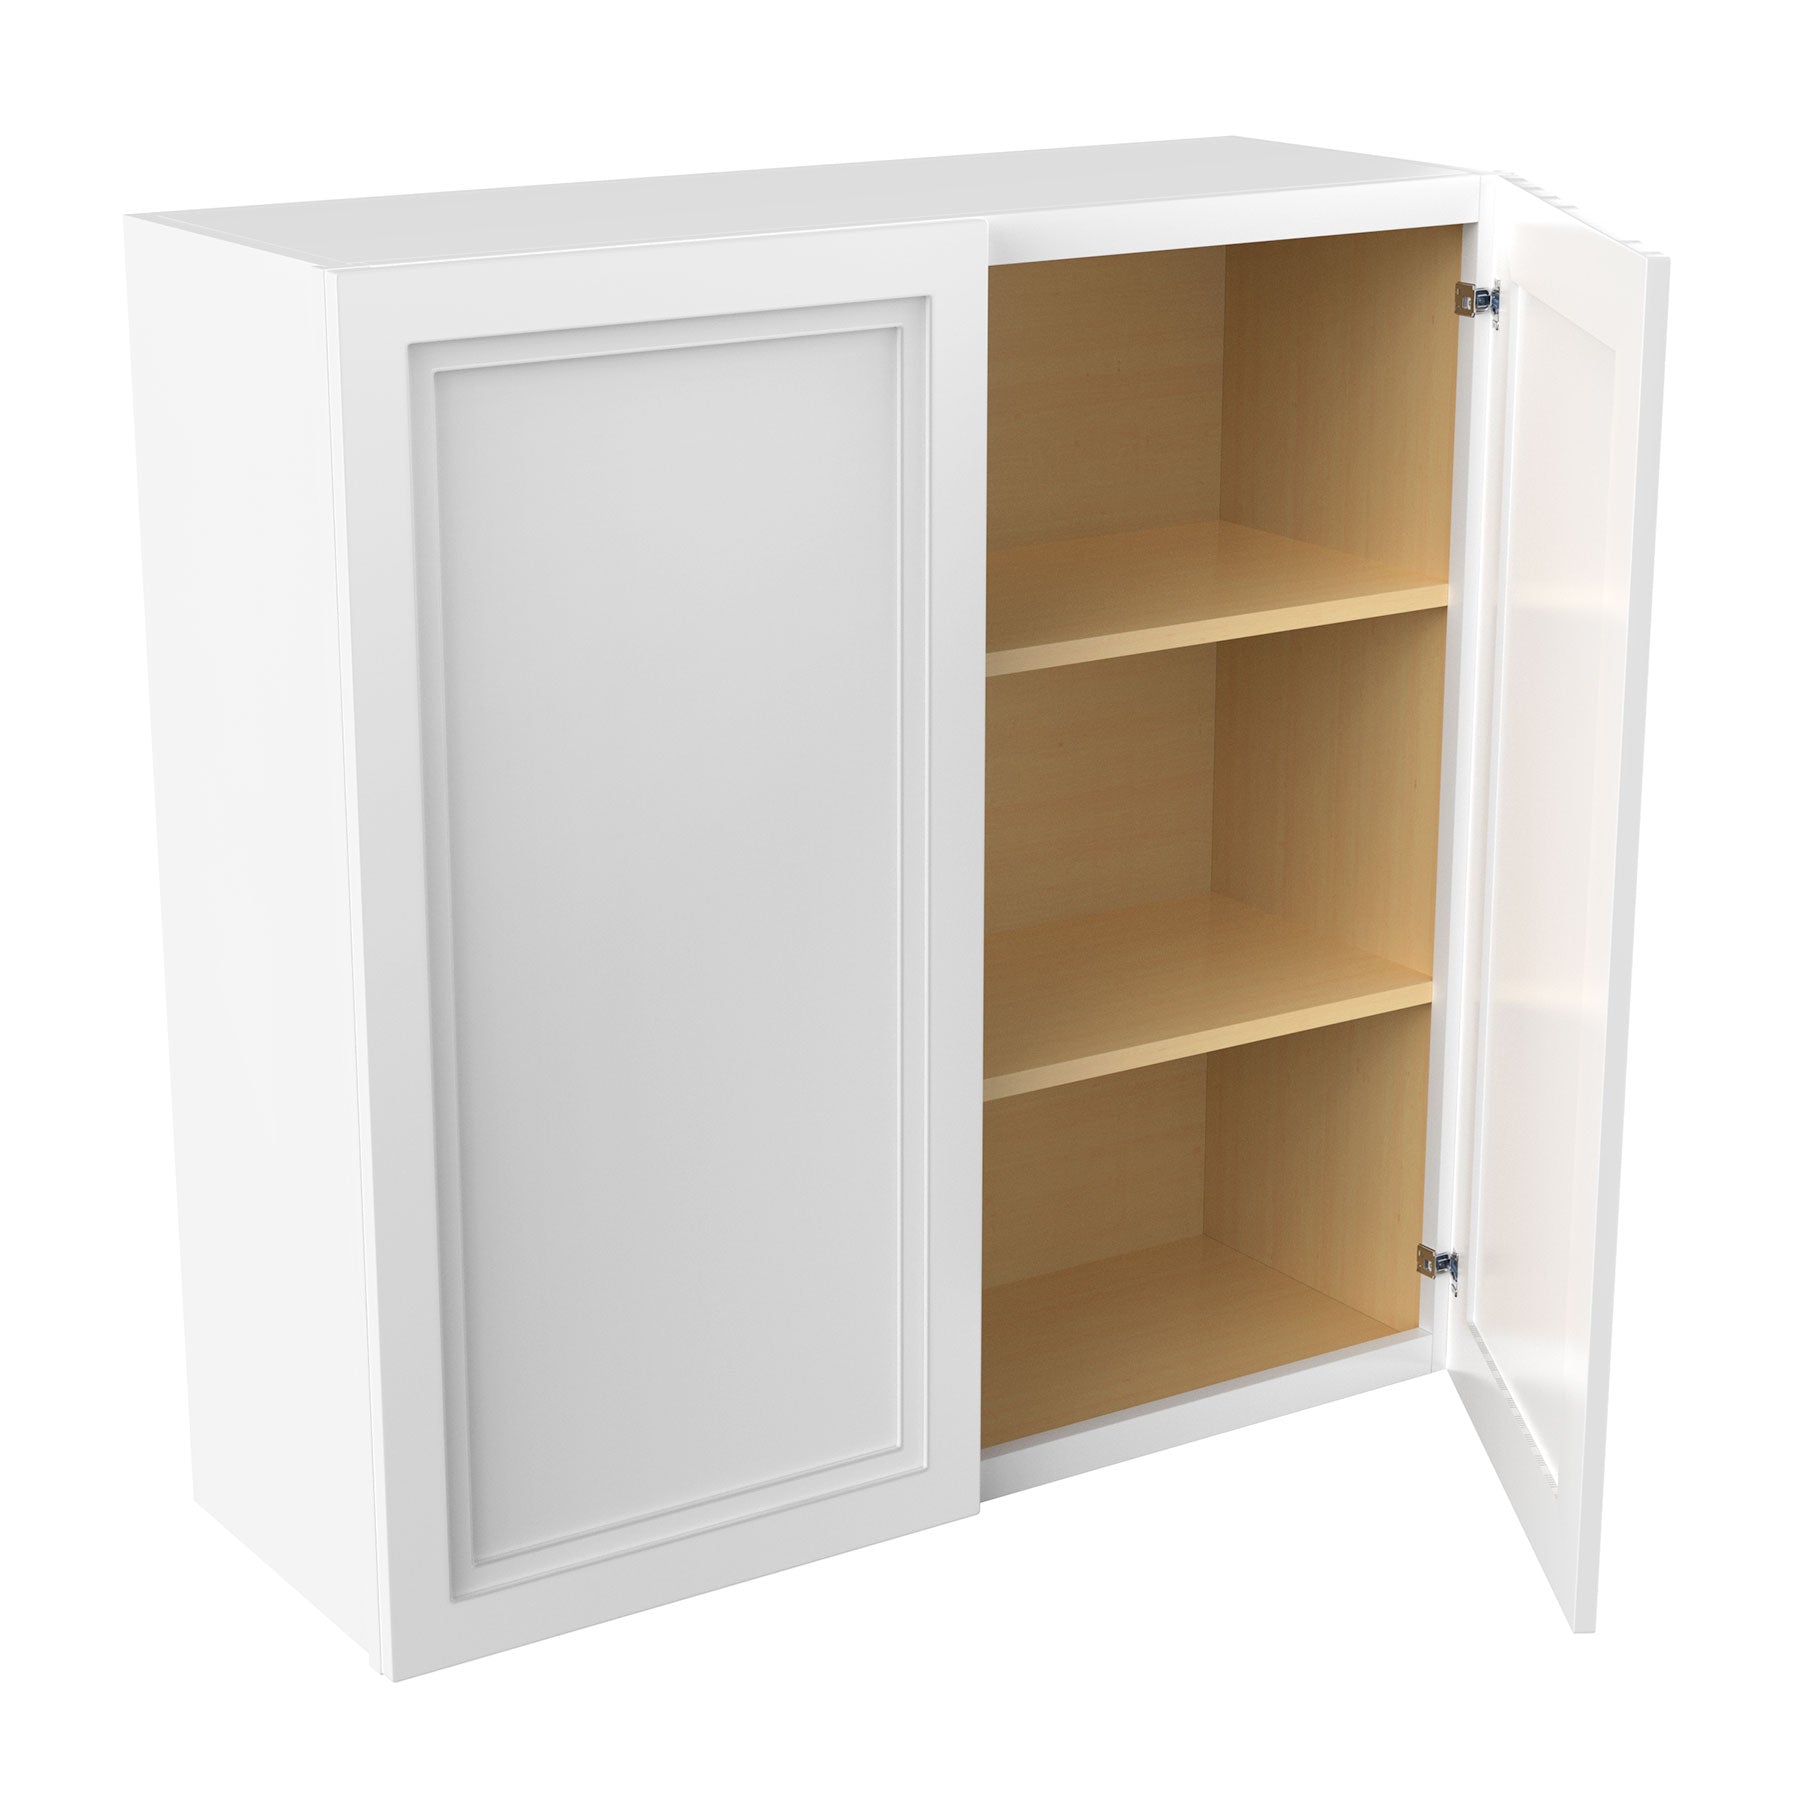 RTA - Fashion White - 36" High Double Door Wall Cabinet | 36"W x 36"H x 12"D